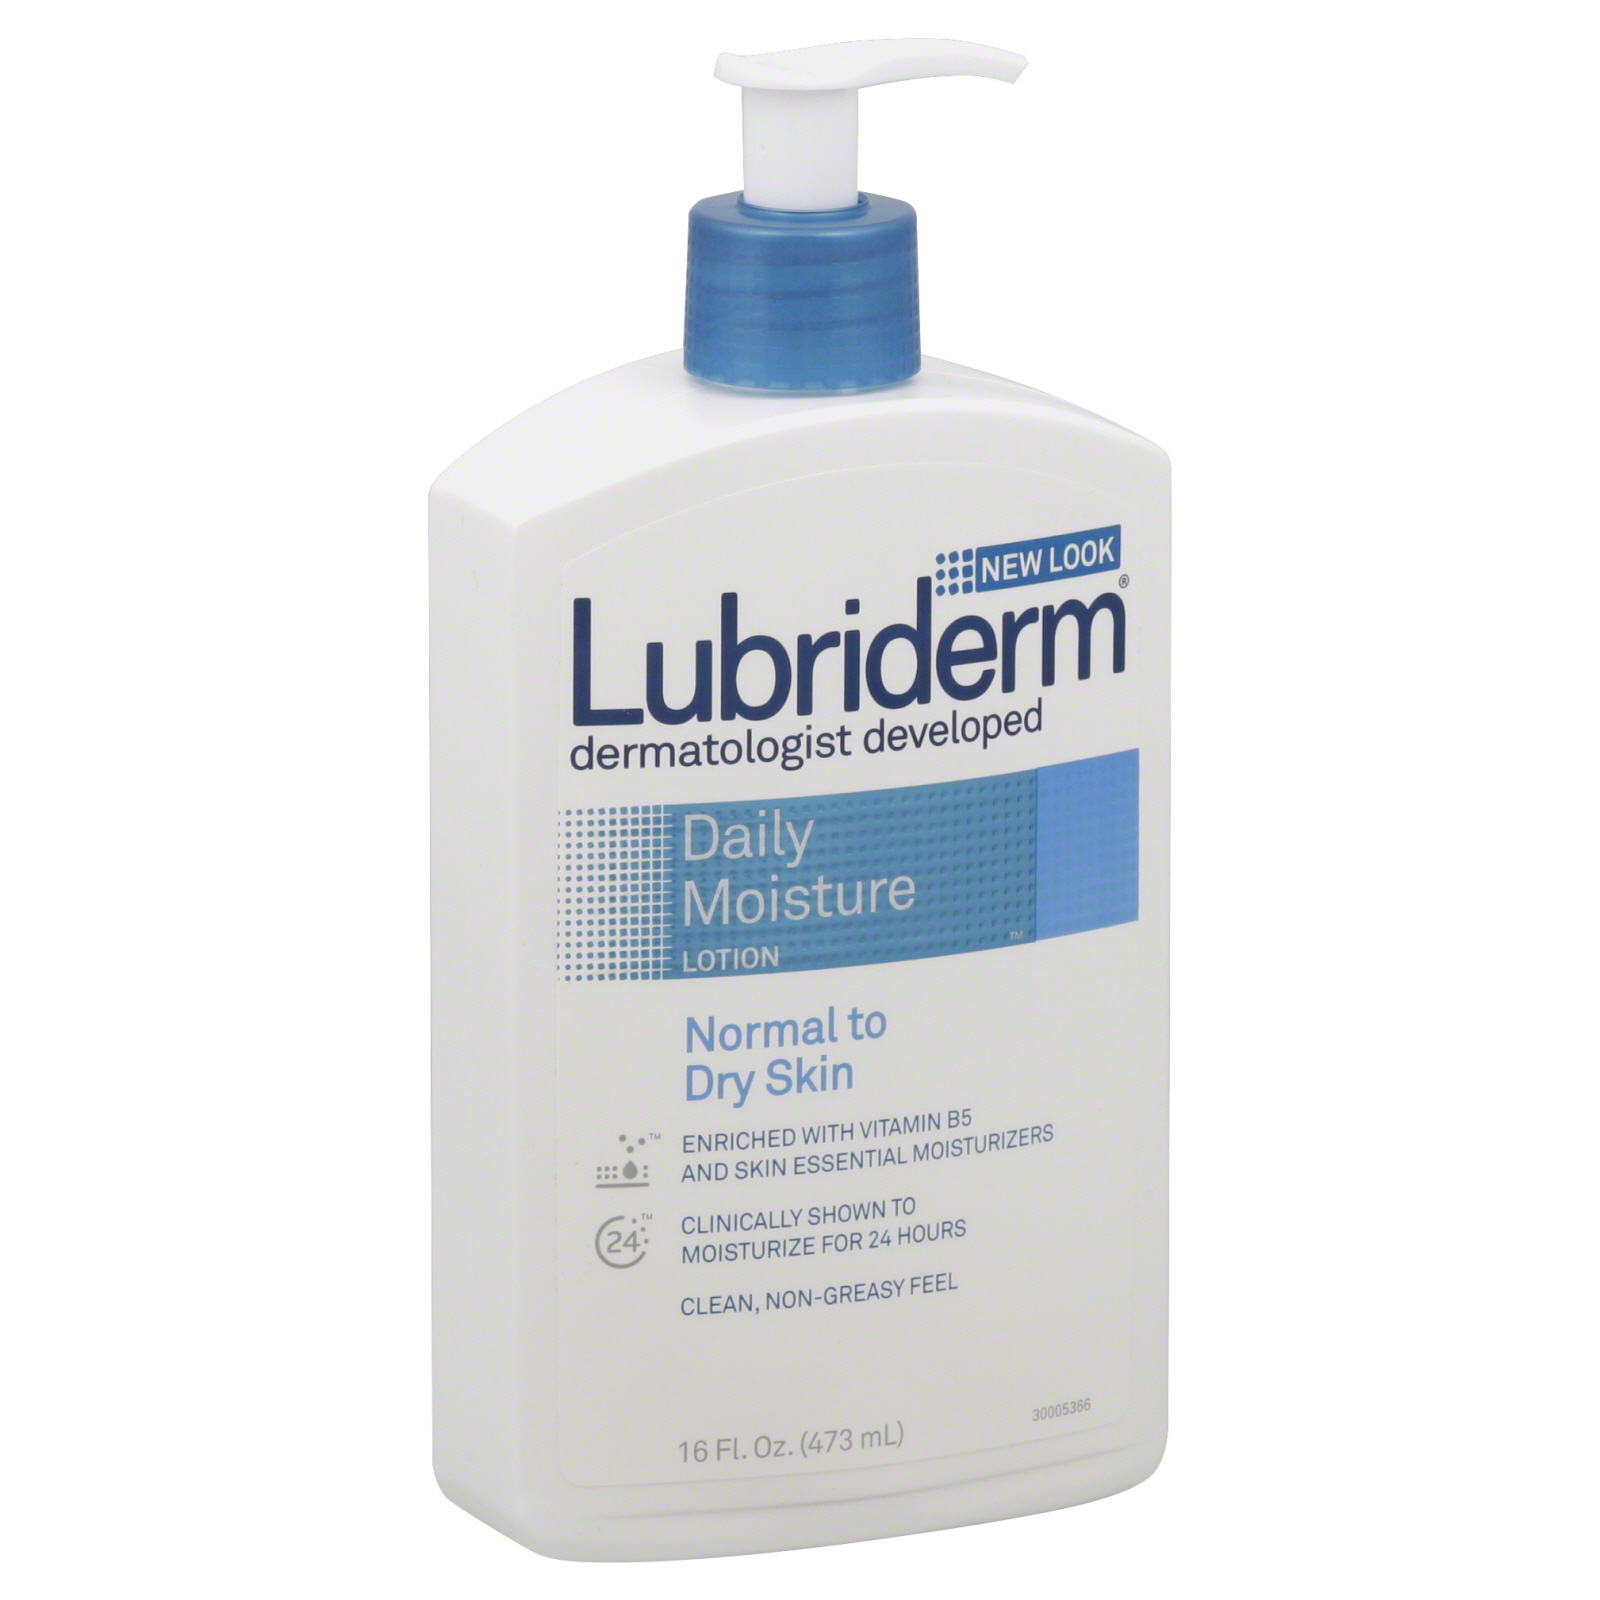 Lubriderm Lotion, Daily Moisture, Normal to Dry Skin, 16 fl oz (473 ml)